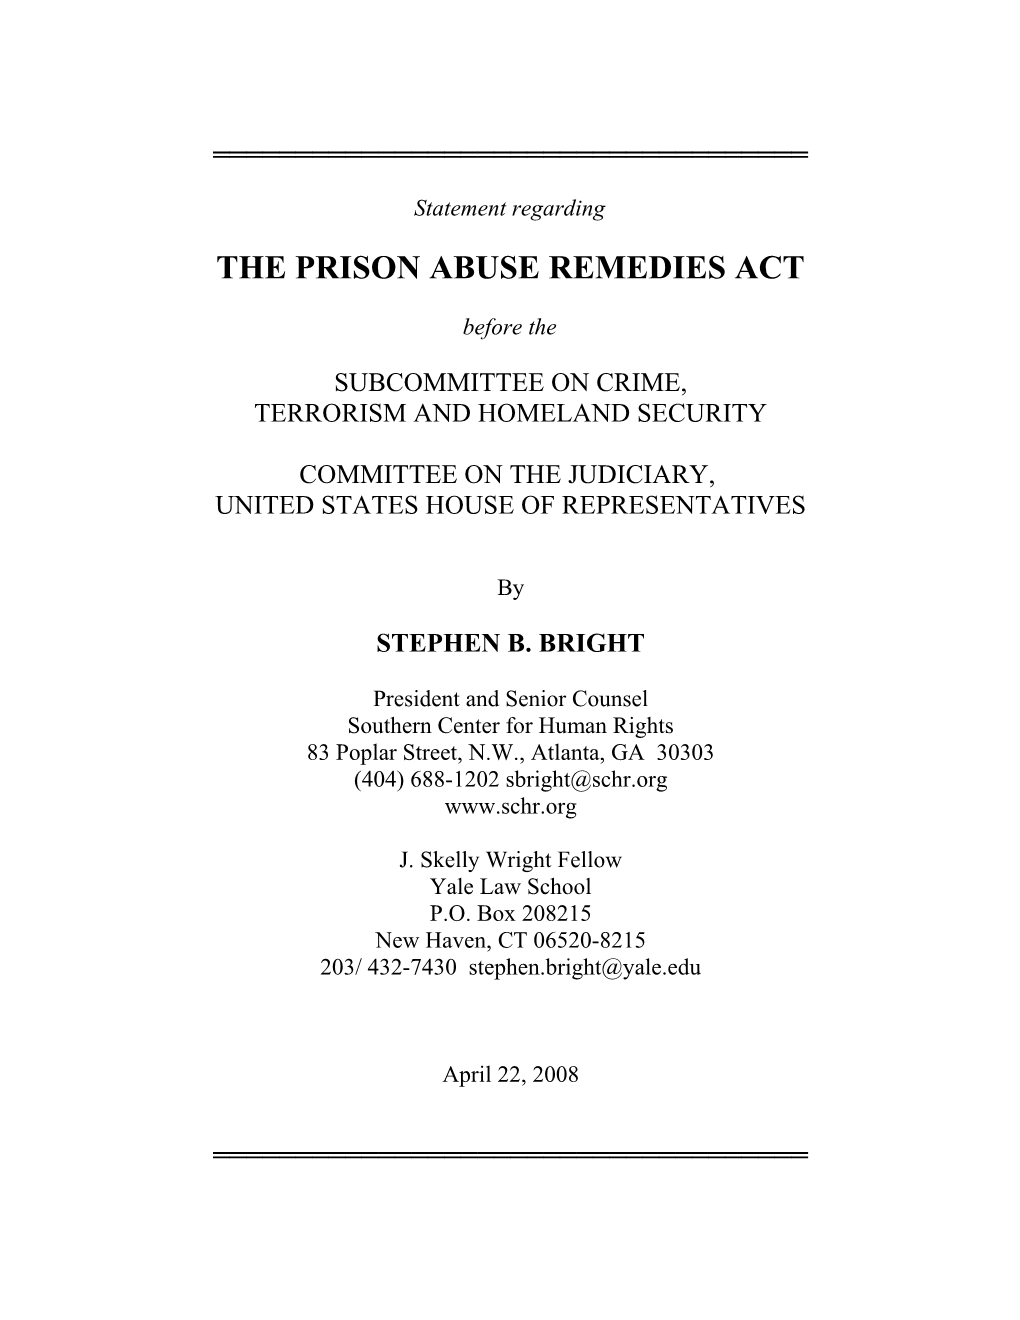 The Prison Abuse Remedies Act